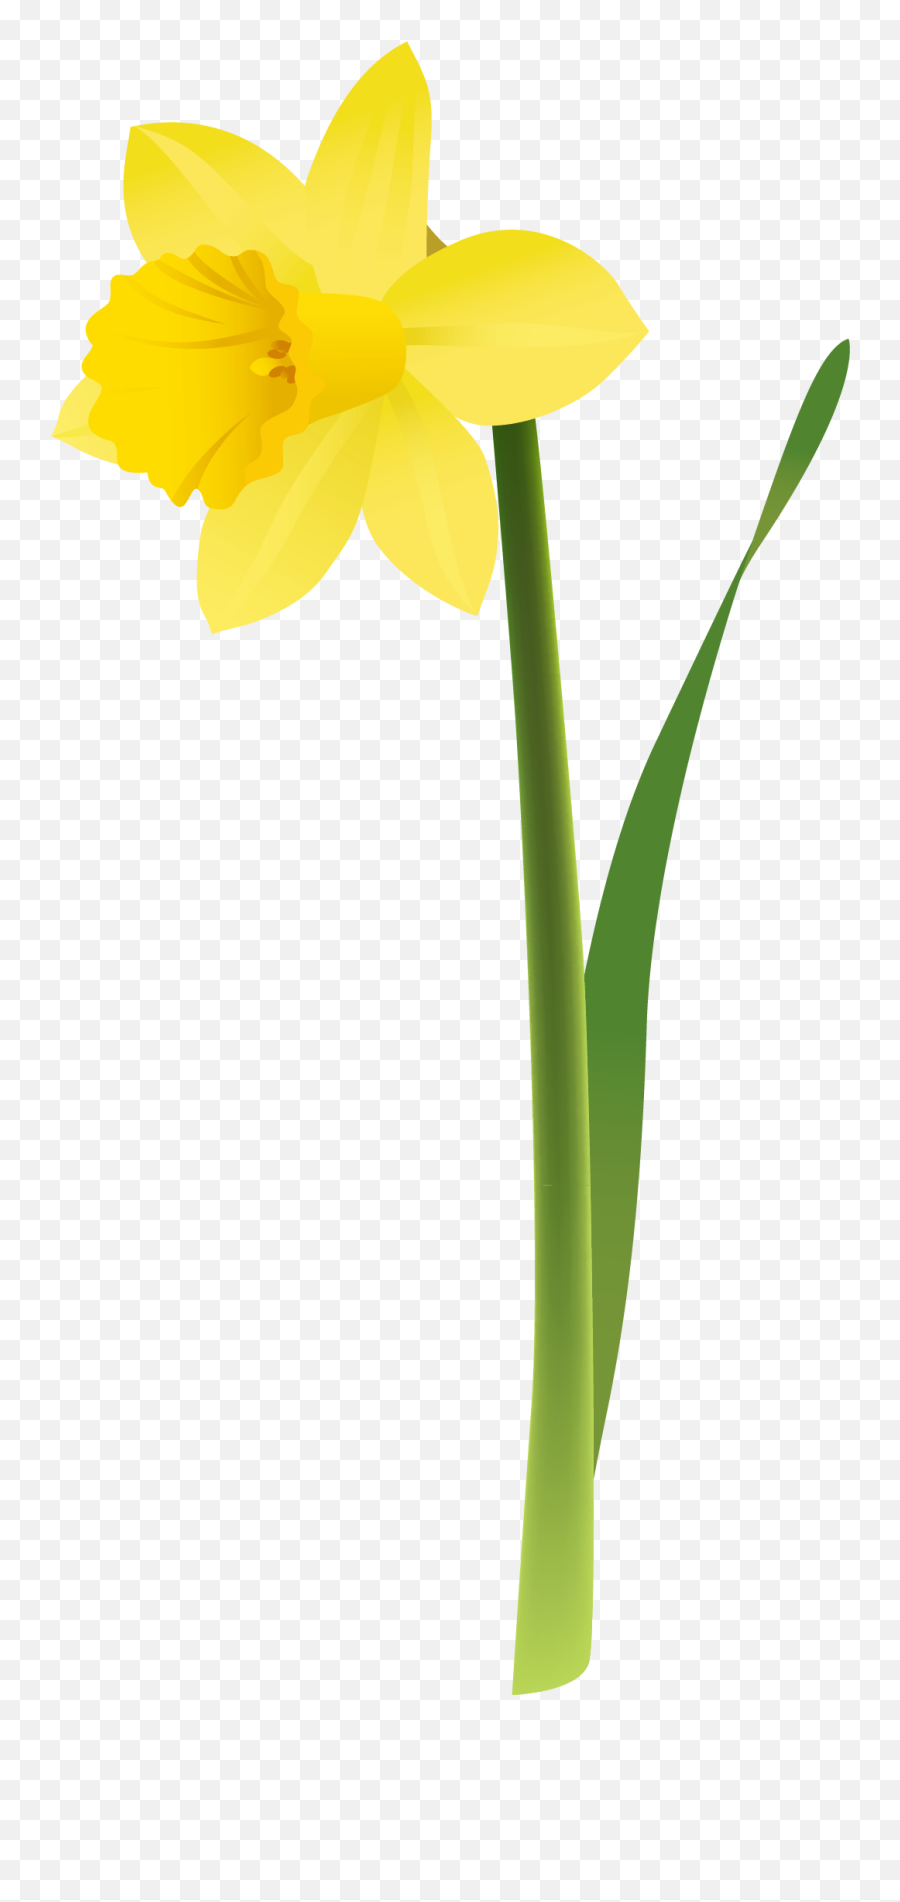 Daffodils Png Picture Hq Image Daffodil Icon